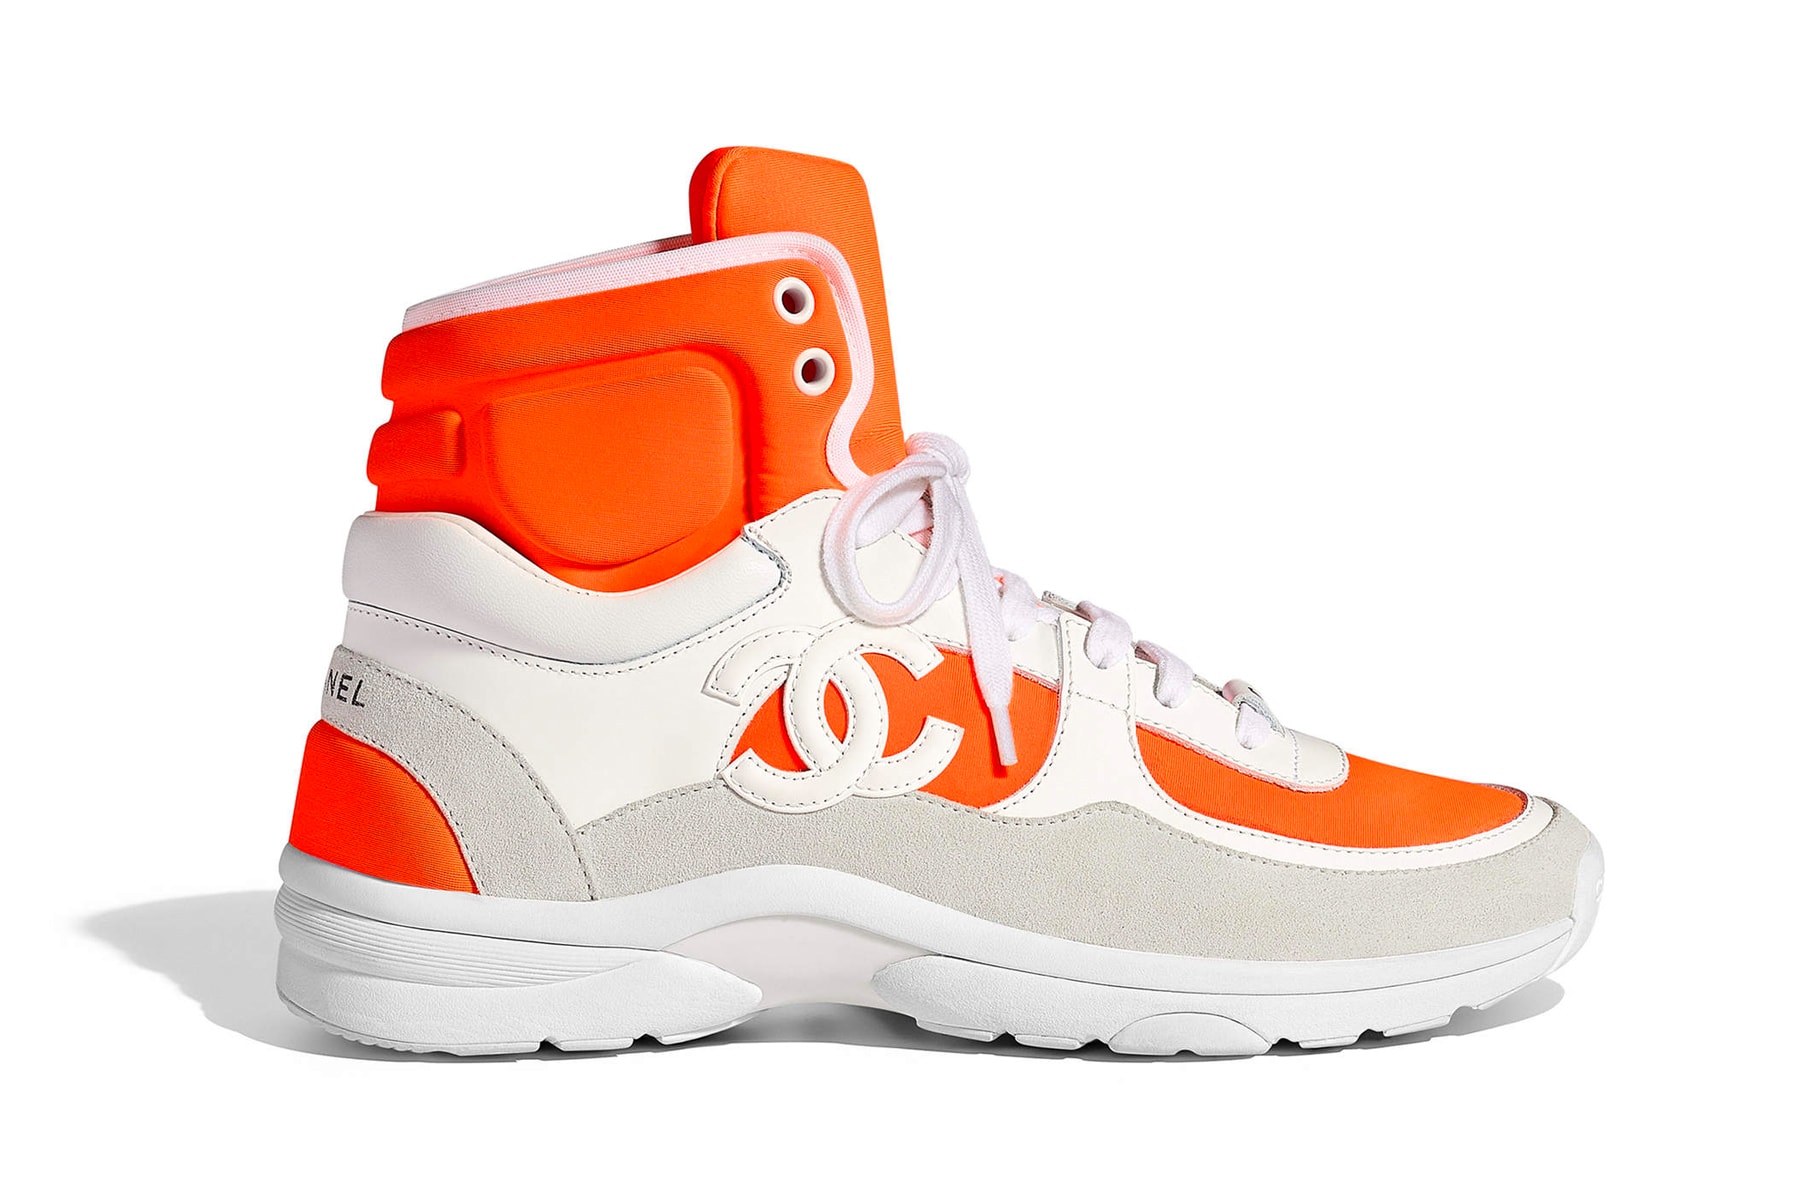 Chanel Spring Summer 2018 Pre-Collection Pre-Spring Sneaker Logo CC Double C Karl Lagerfeld High Top Orange White